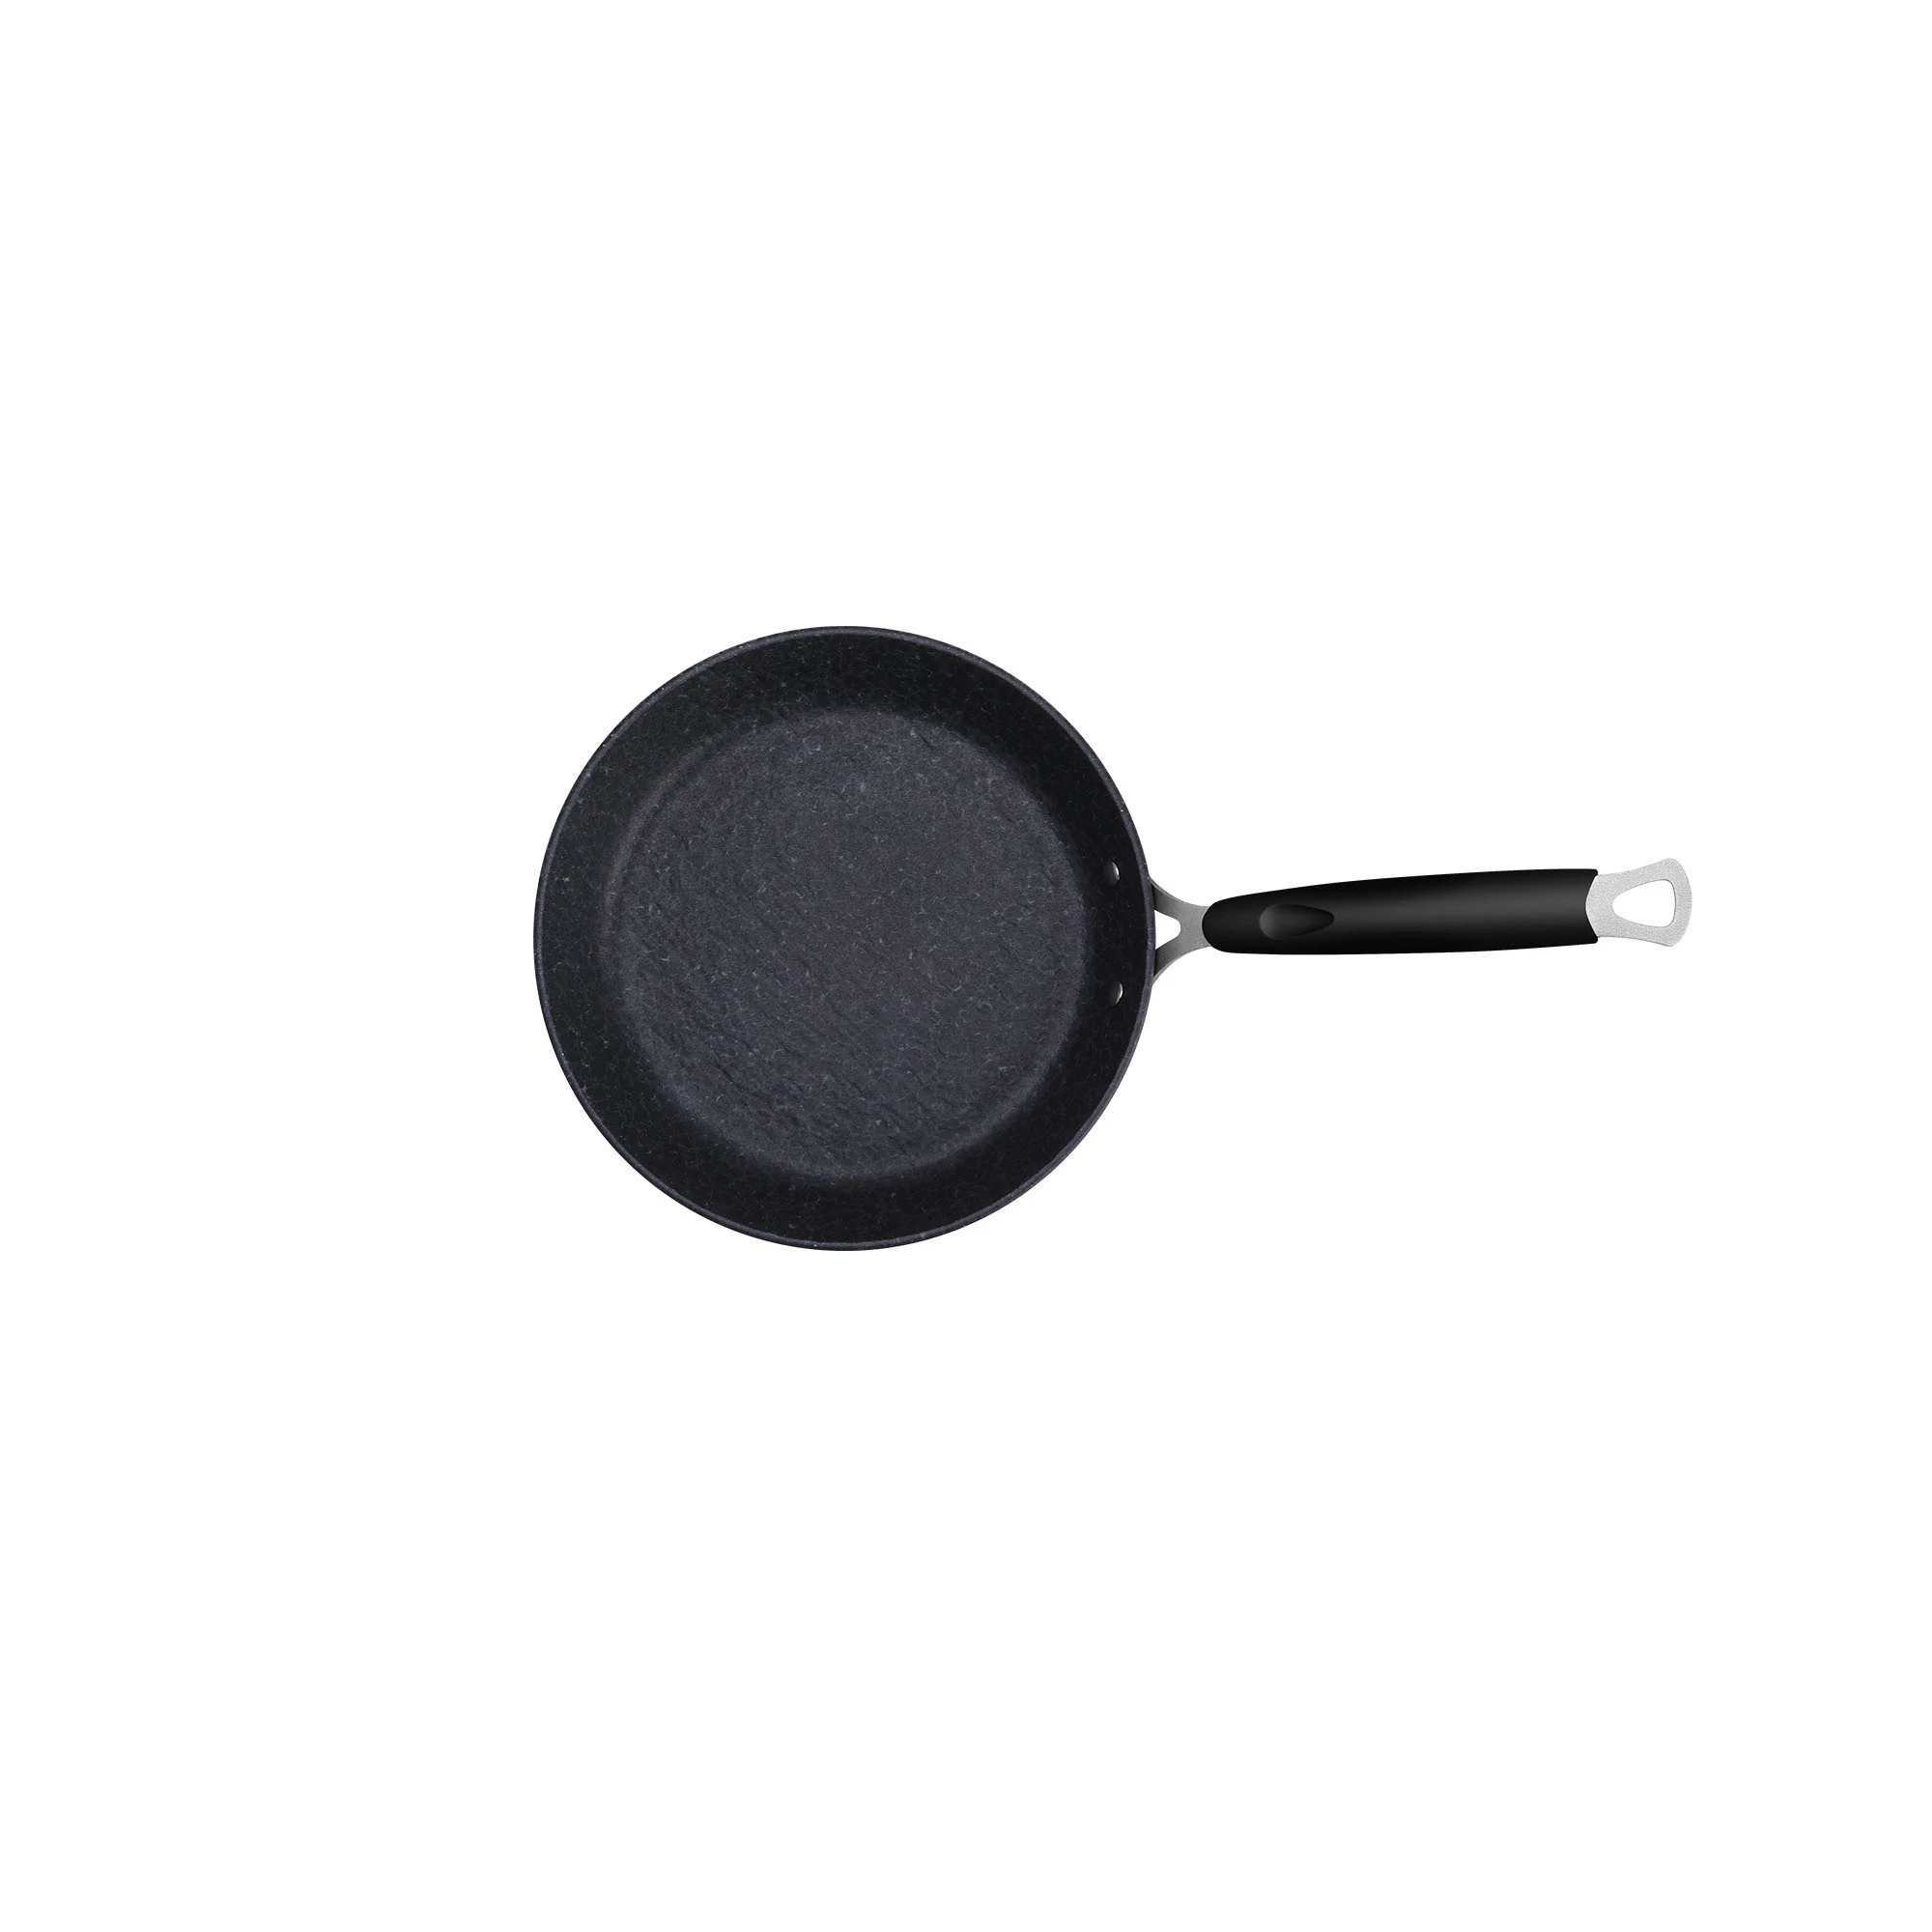 Amercook warehouses in the US Kitchen 2 Layers Unique Products Sell Forged Aluminum Frying Pan non-stick cookware